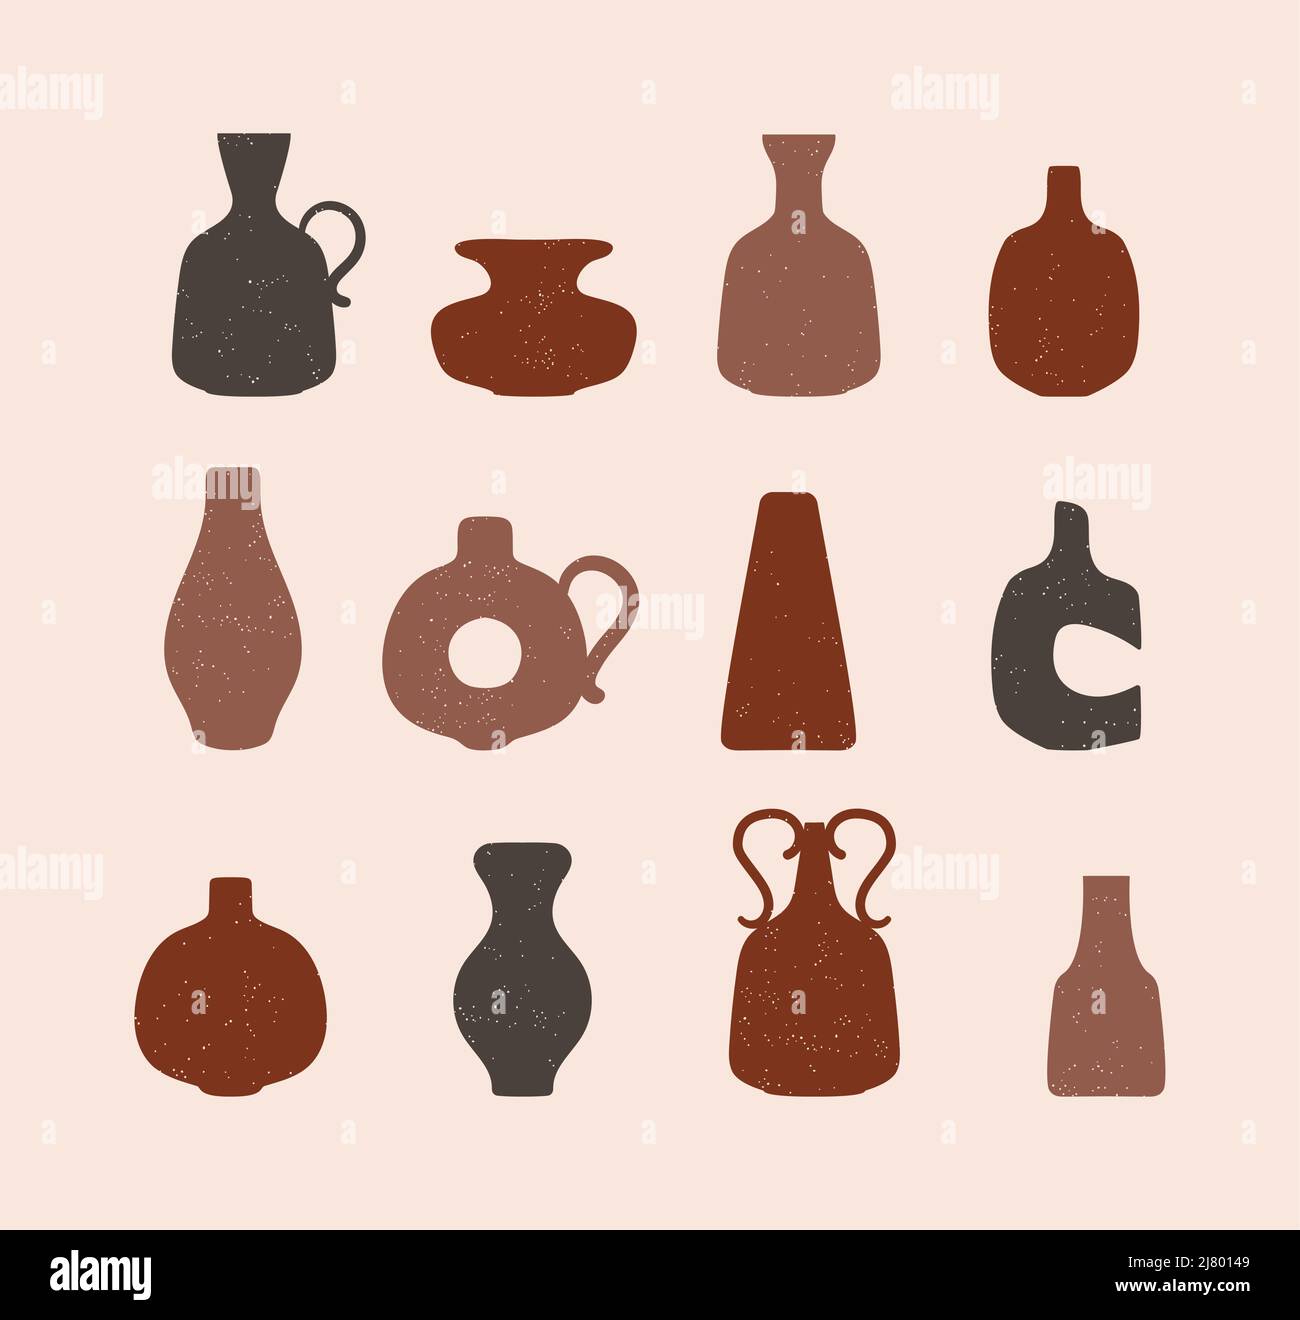 Different shapes vases, pots, and bottles Stock Vector